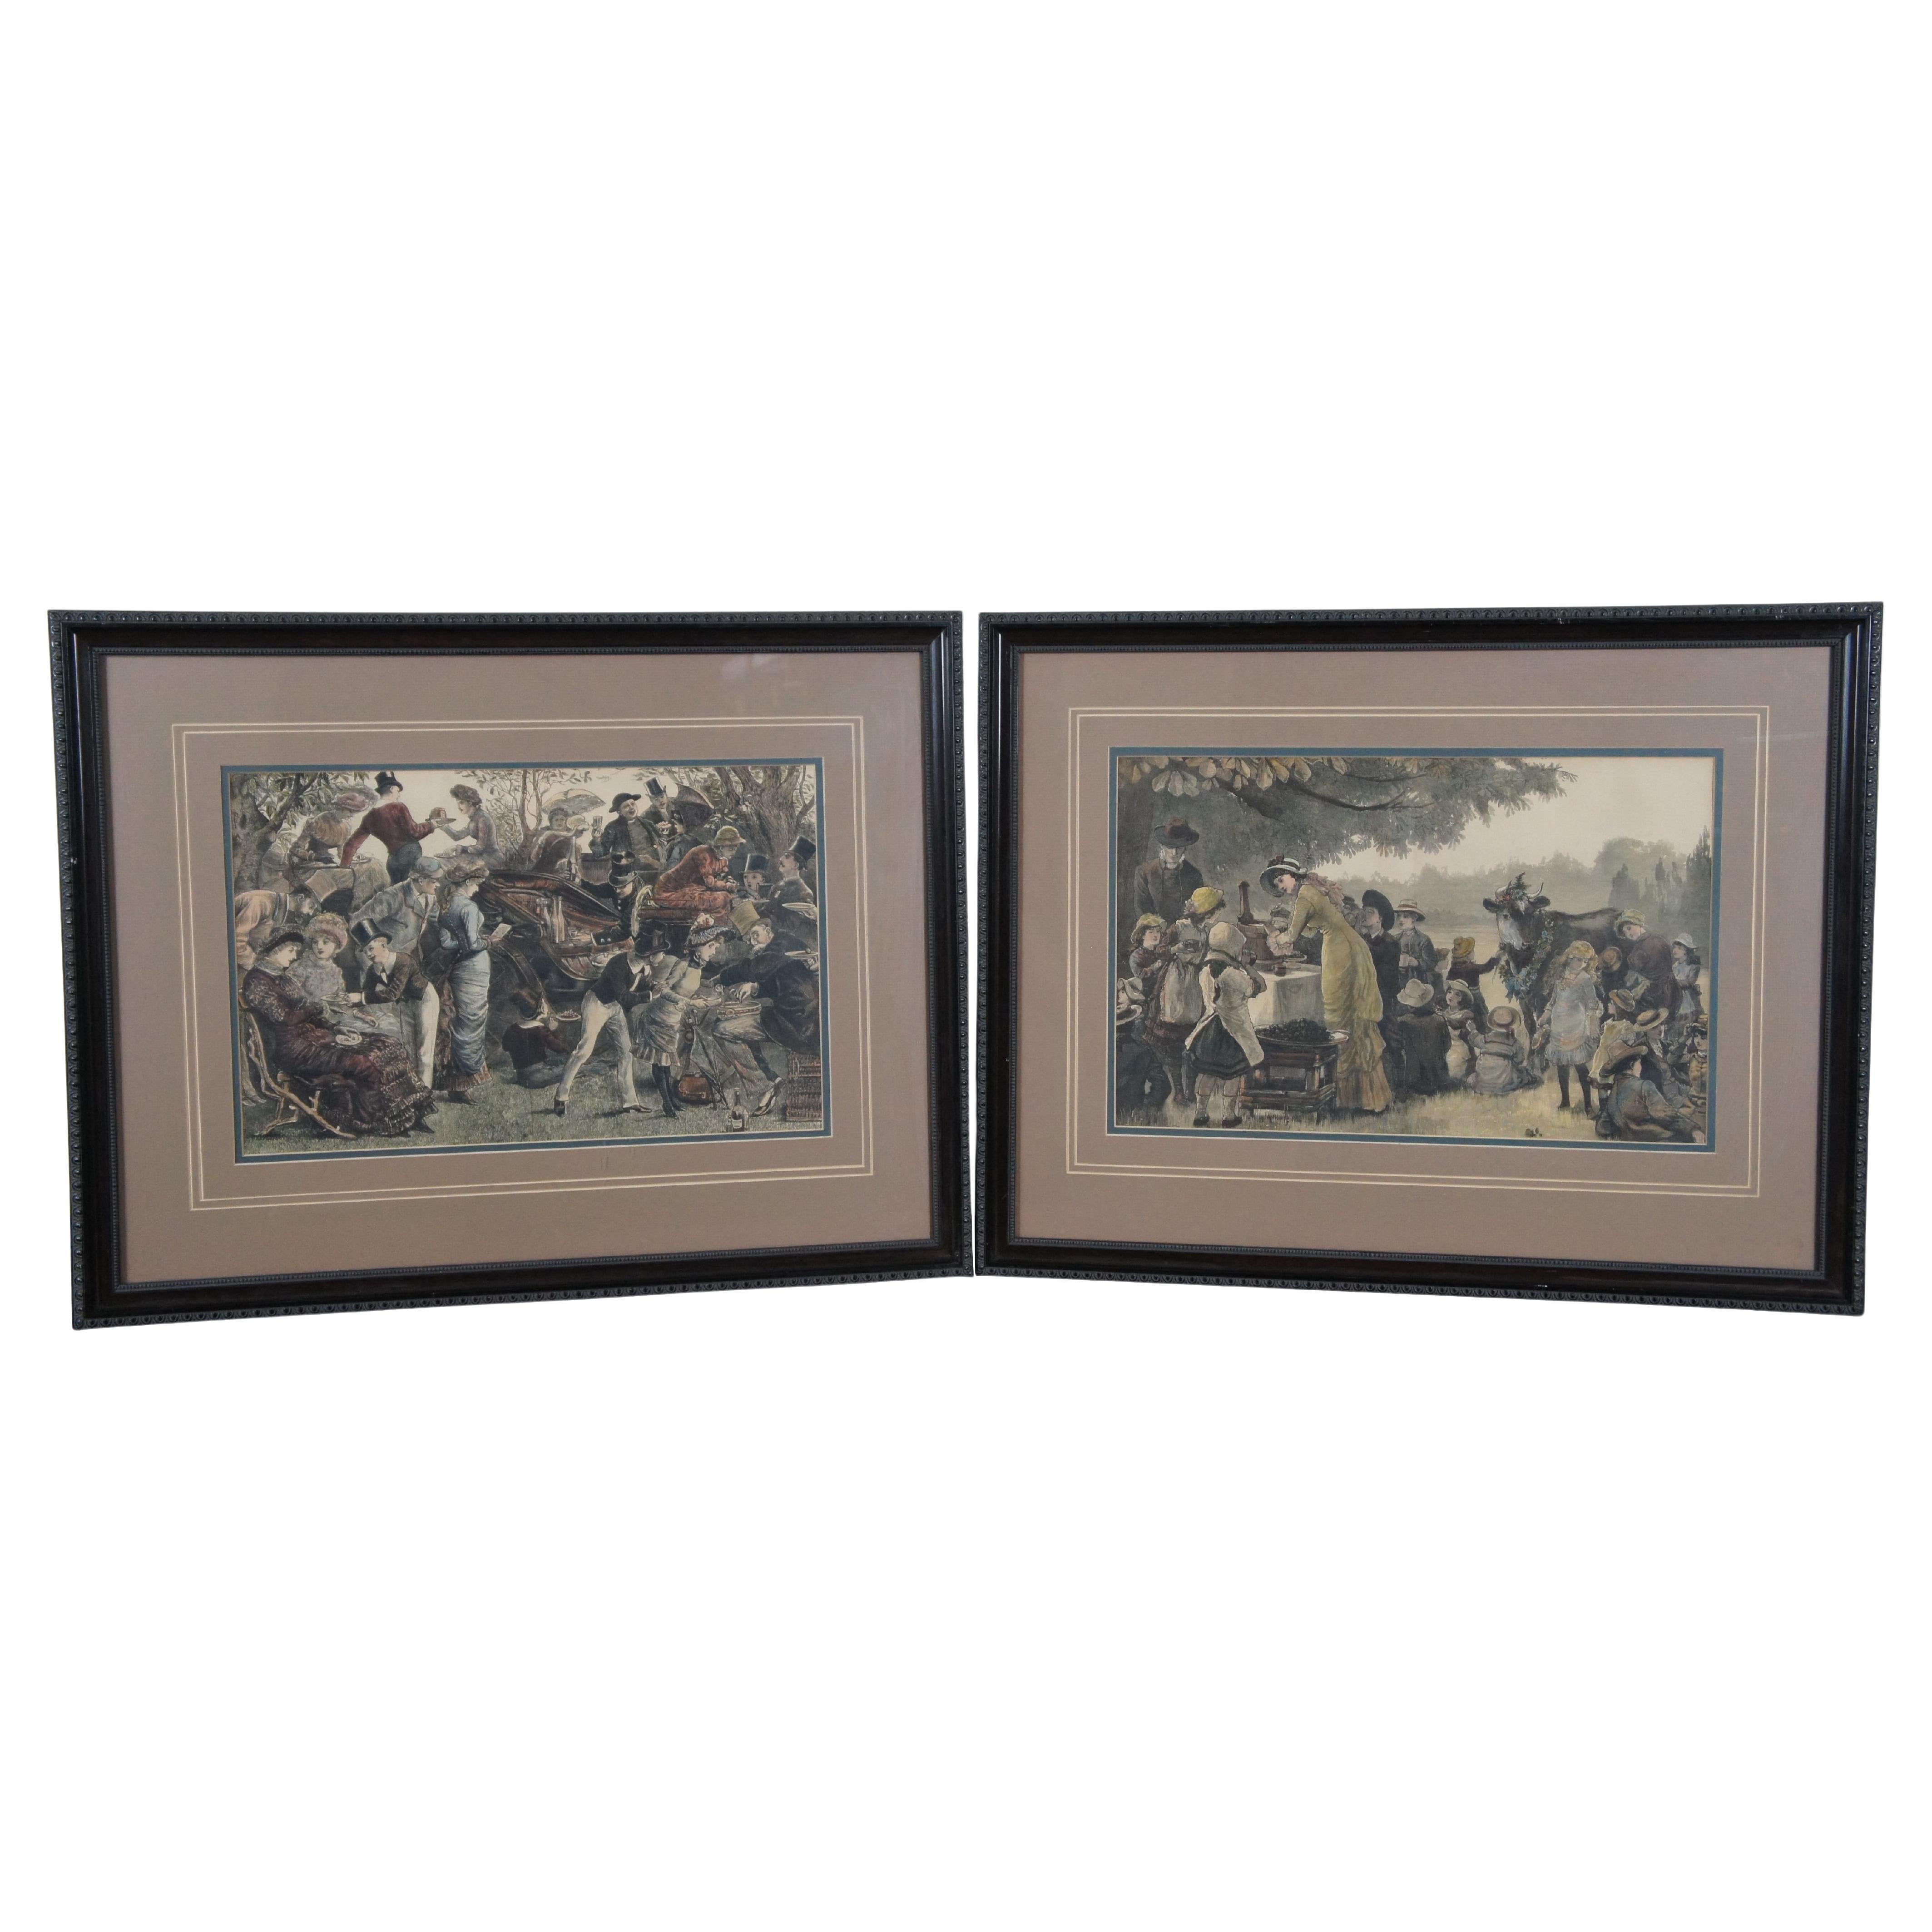 2 Antique Harry Furniss Eton Harrow Cricket Match Day in Arcadia Engravings 27" For Sale